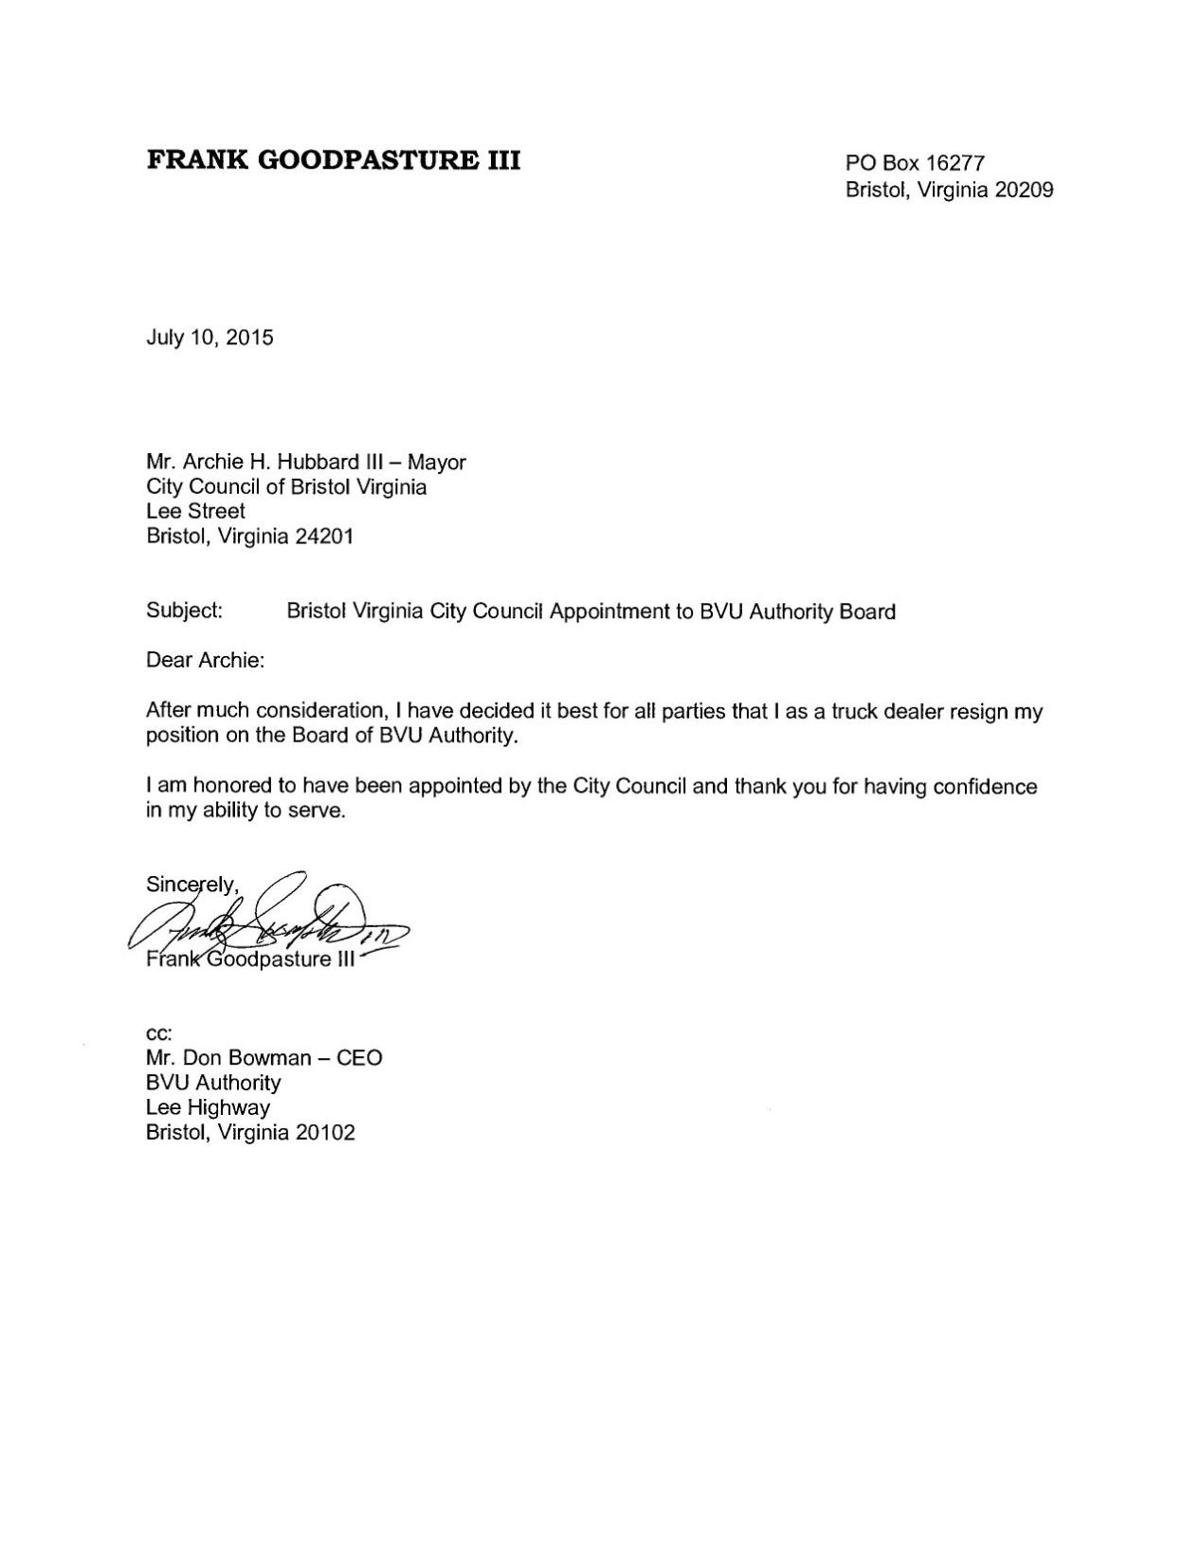 Resign From Board Letter from bloximages.newyork1.vip.townnews.com